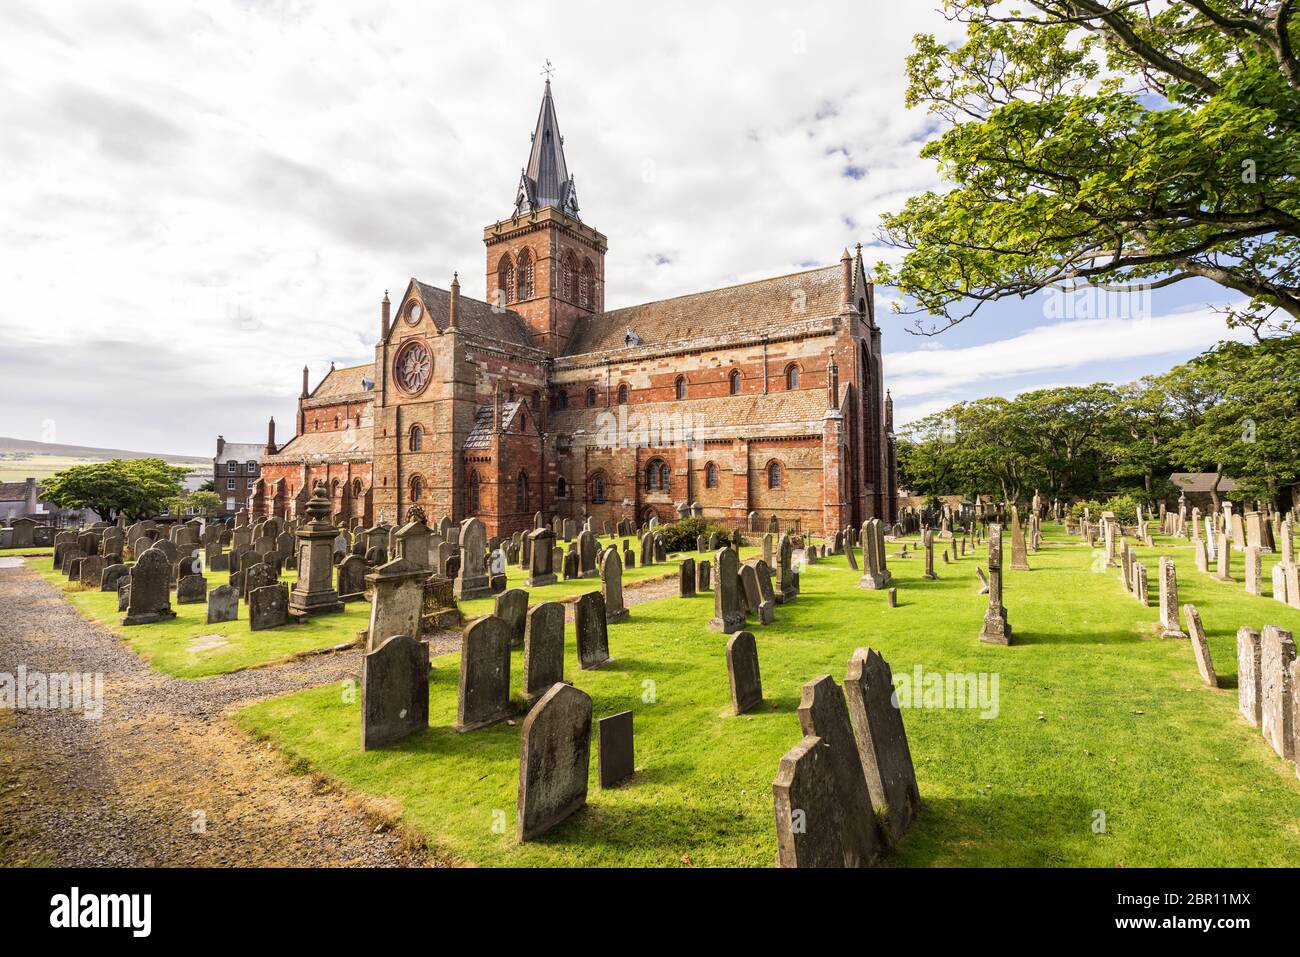 St Magnus Cathedral and surrounding gothic graveyard in Kirkwall, Orkney Islands, Scotland. The holy red sandstone architecture is part of the church Stock Photo